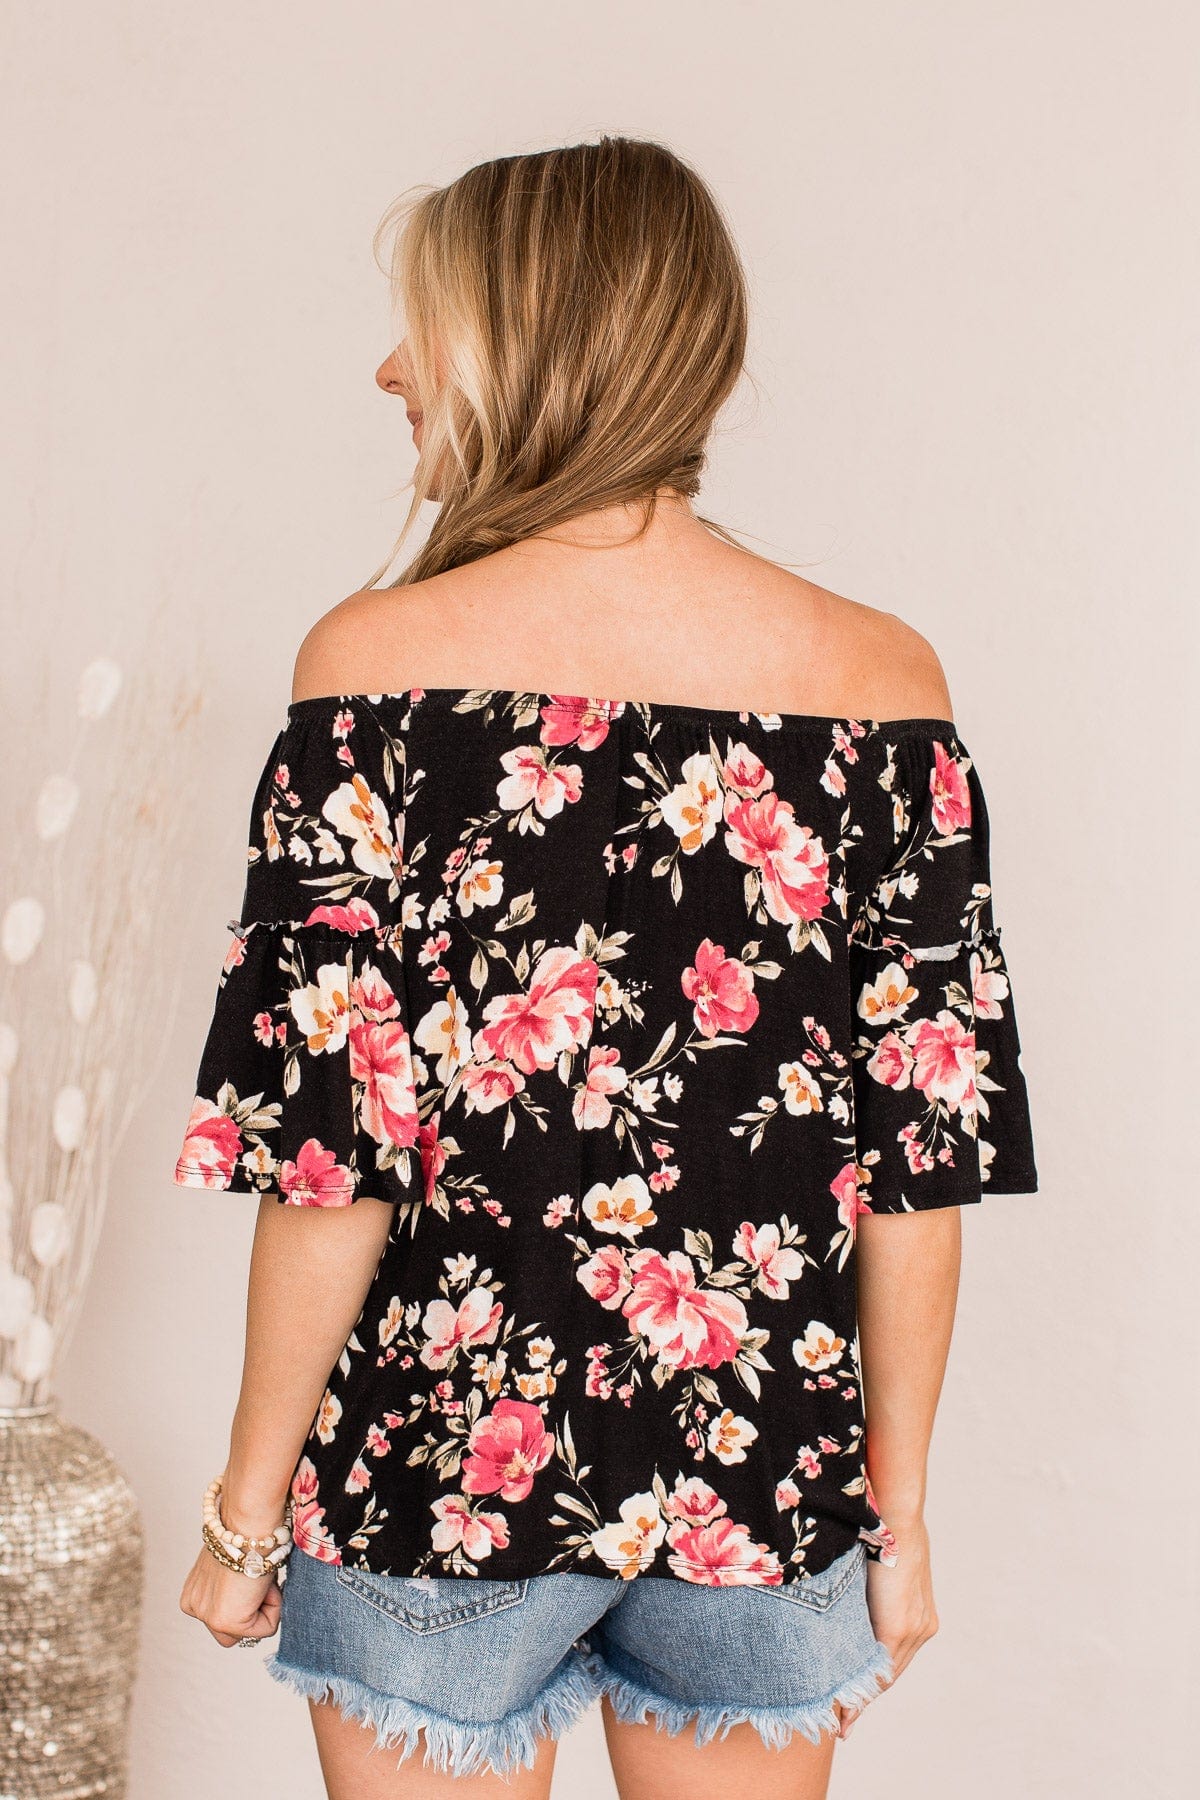 Those Who Wander Floral Top- Black